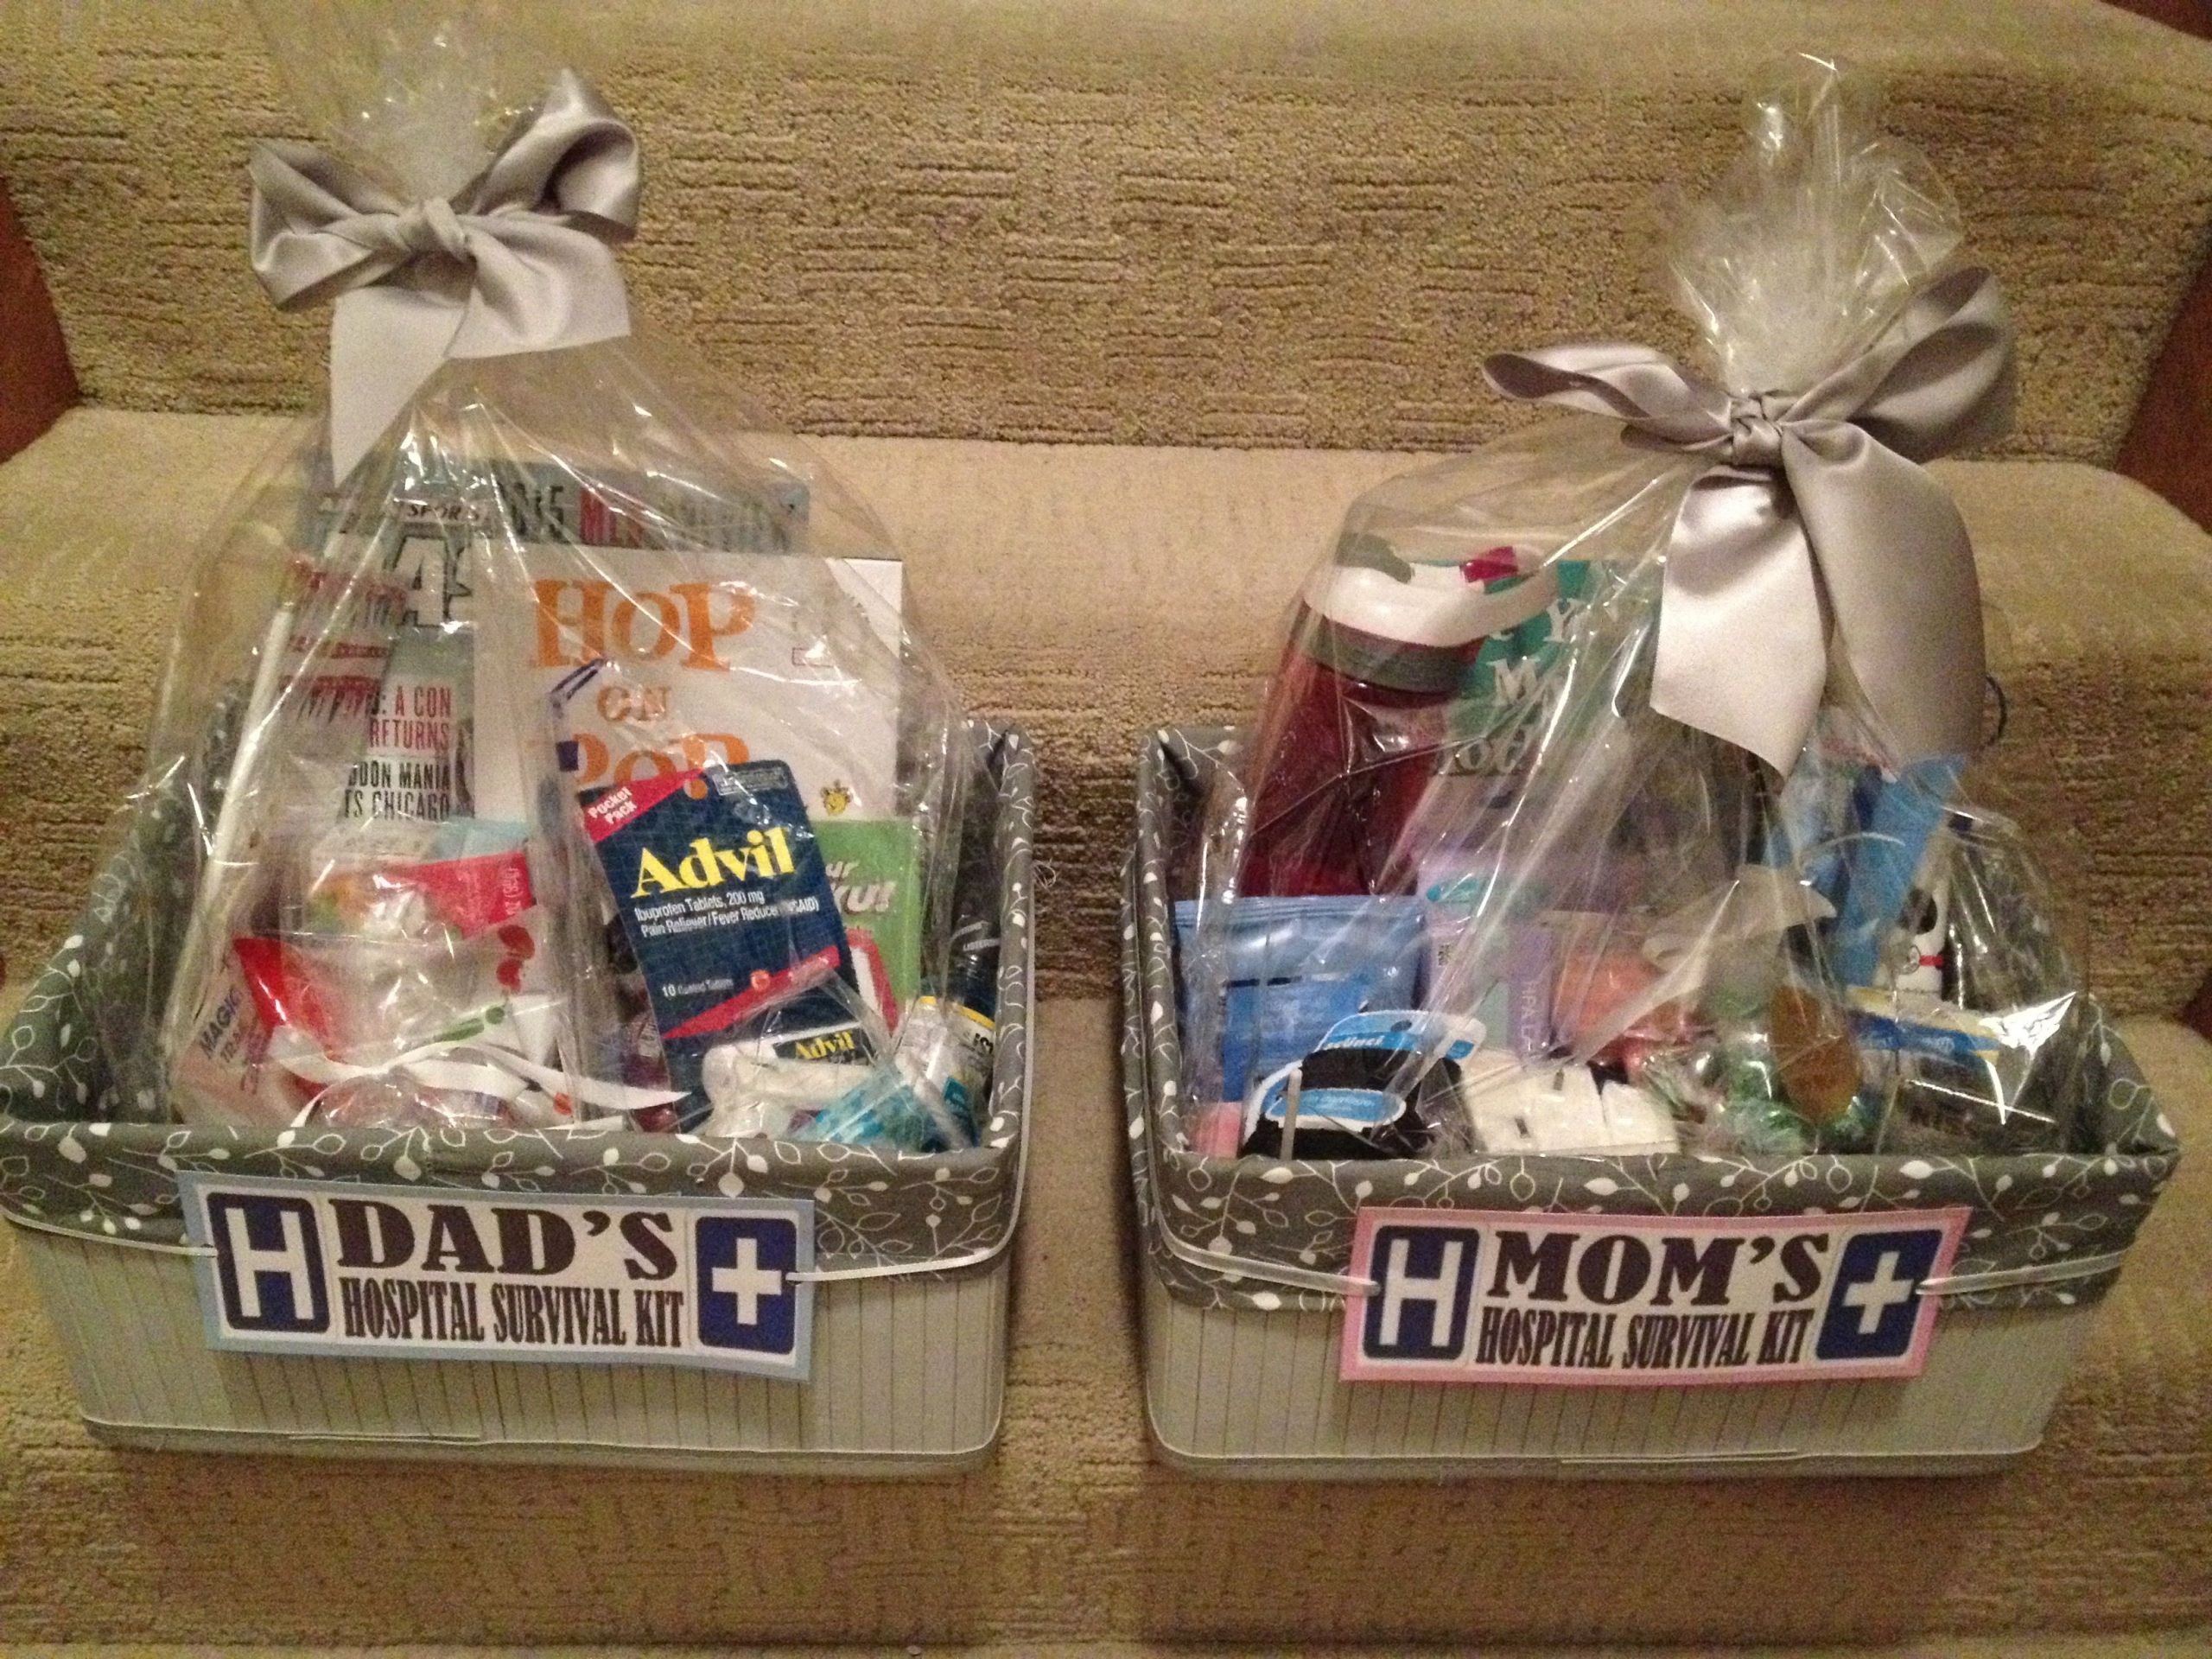 Baby Shower Gift Ideas For Mom And Dad
 Mom and Dad "to be" hospital survival kits